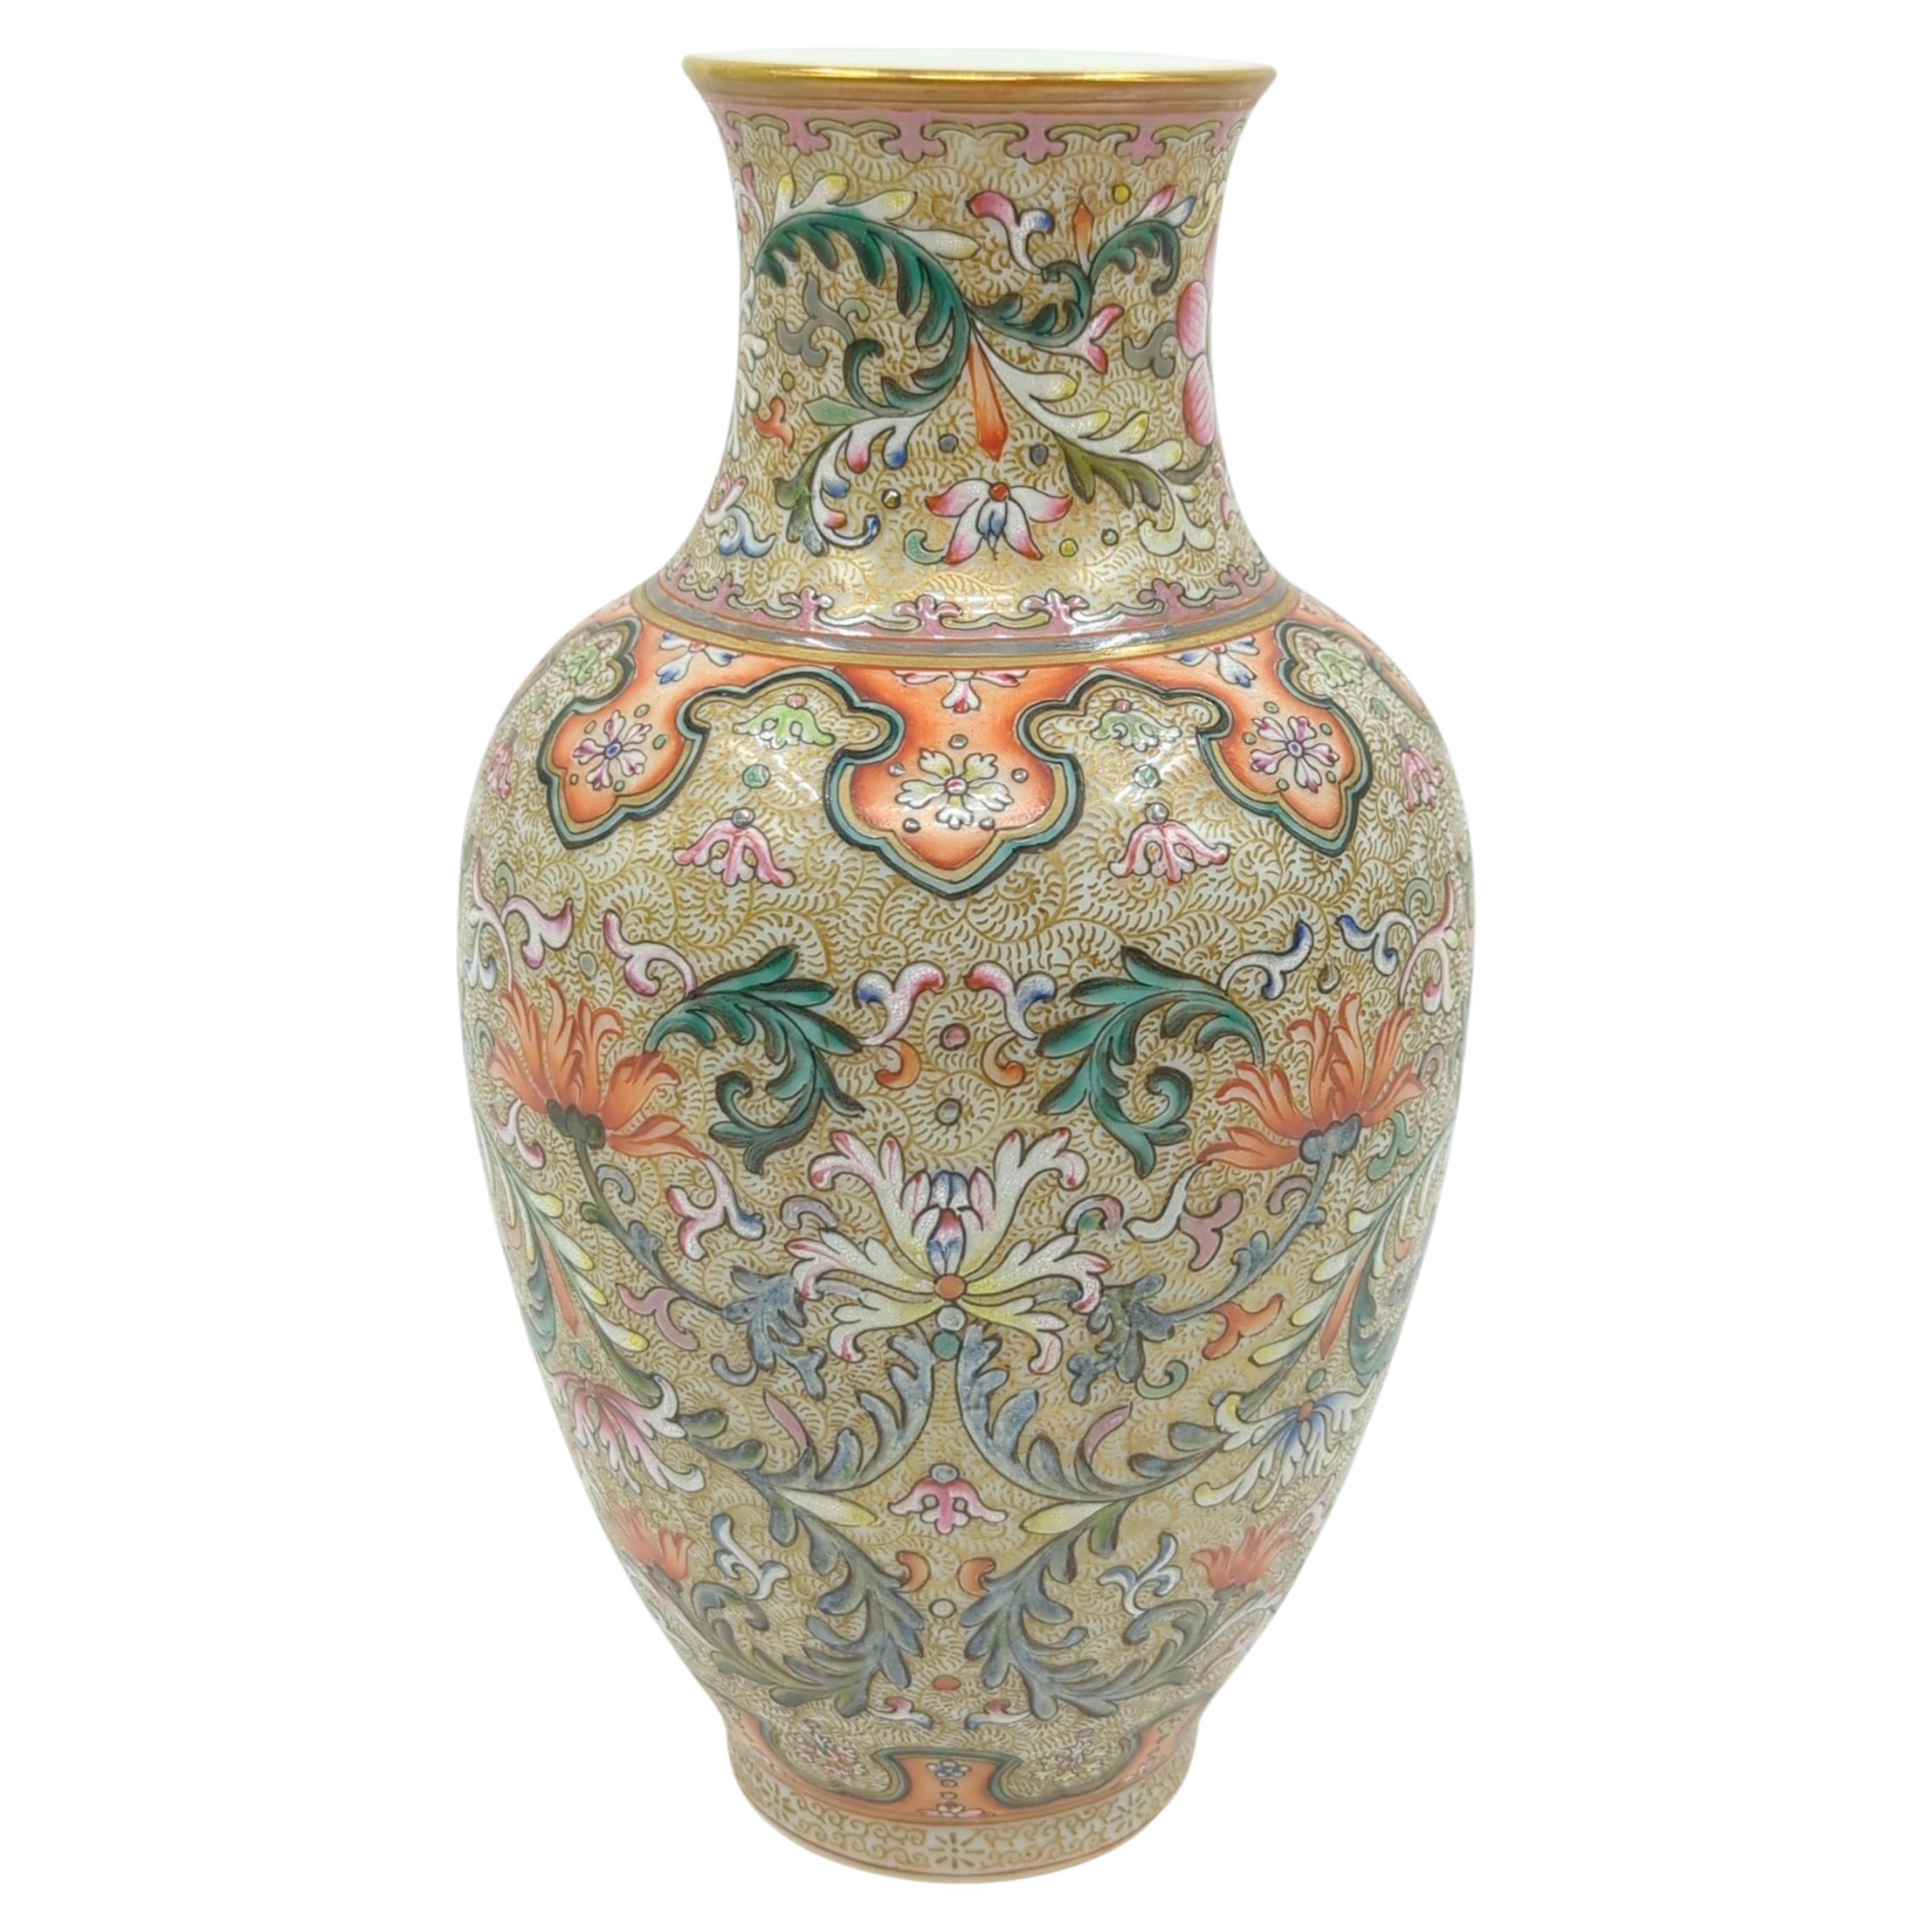 An exceptional Chinese porcelain baluster vase, a testament to the intricate craftsmanship and artistic mastery of traditional Chinese ceramics. The vase is well-potted, featuring a harmonious balance of form and decoration that exemplifies the high